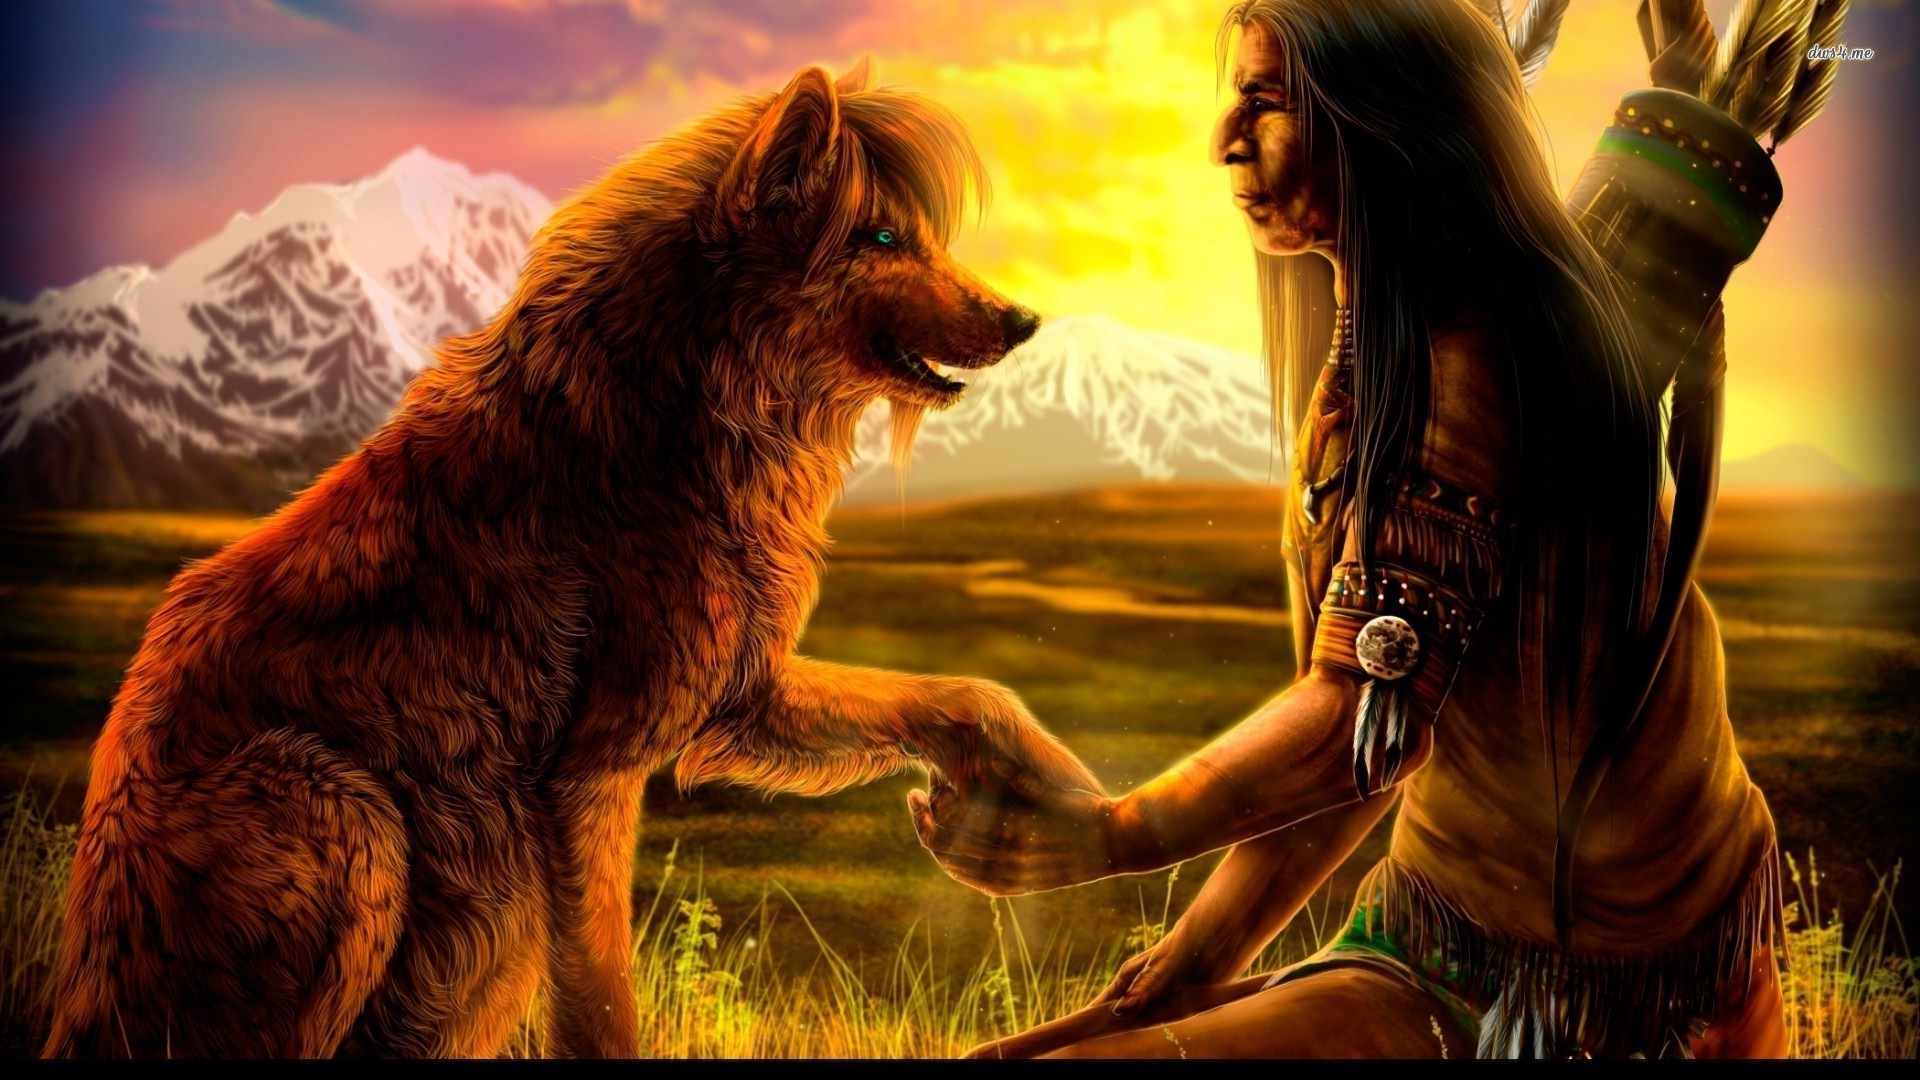 1920x1080 Native Americans | Native American with a wolf wallpaper 1280x800 Native  American with a .